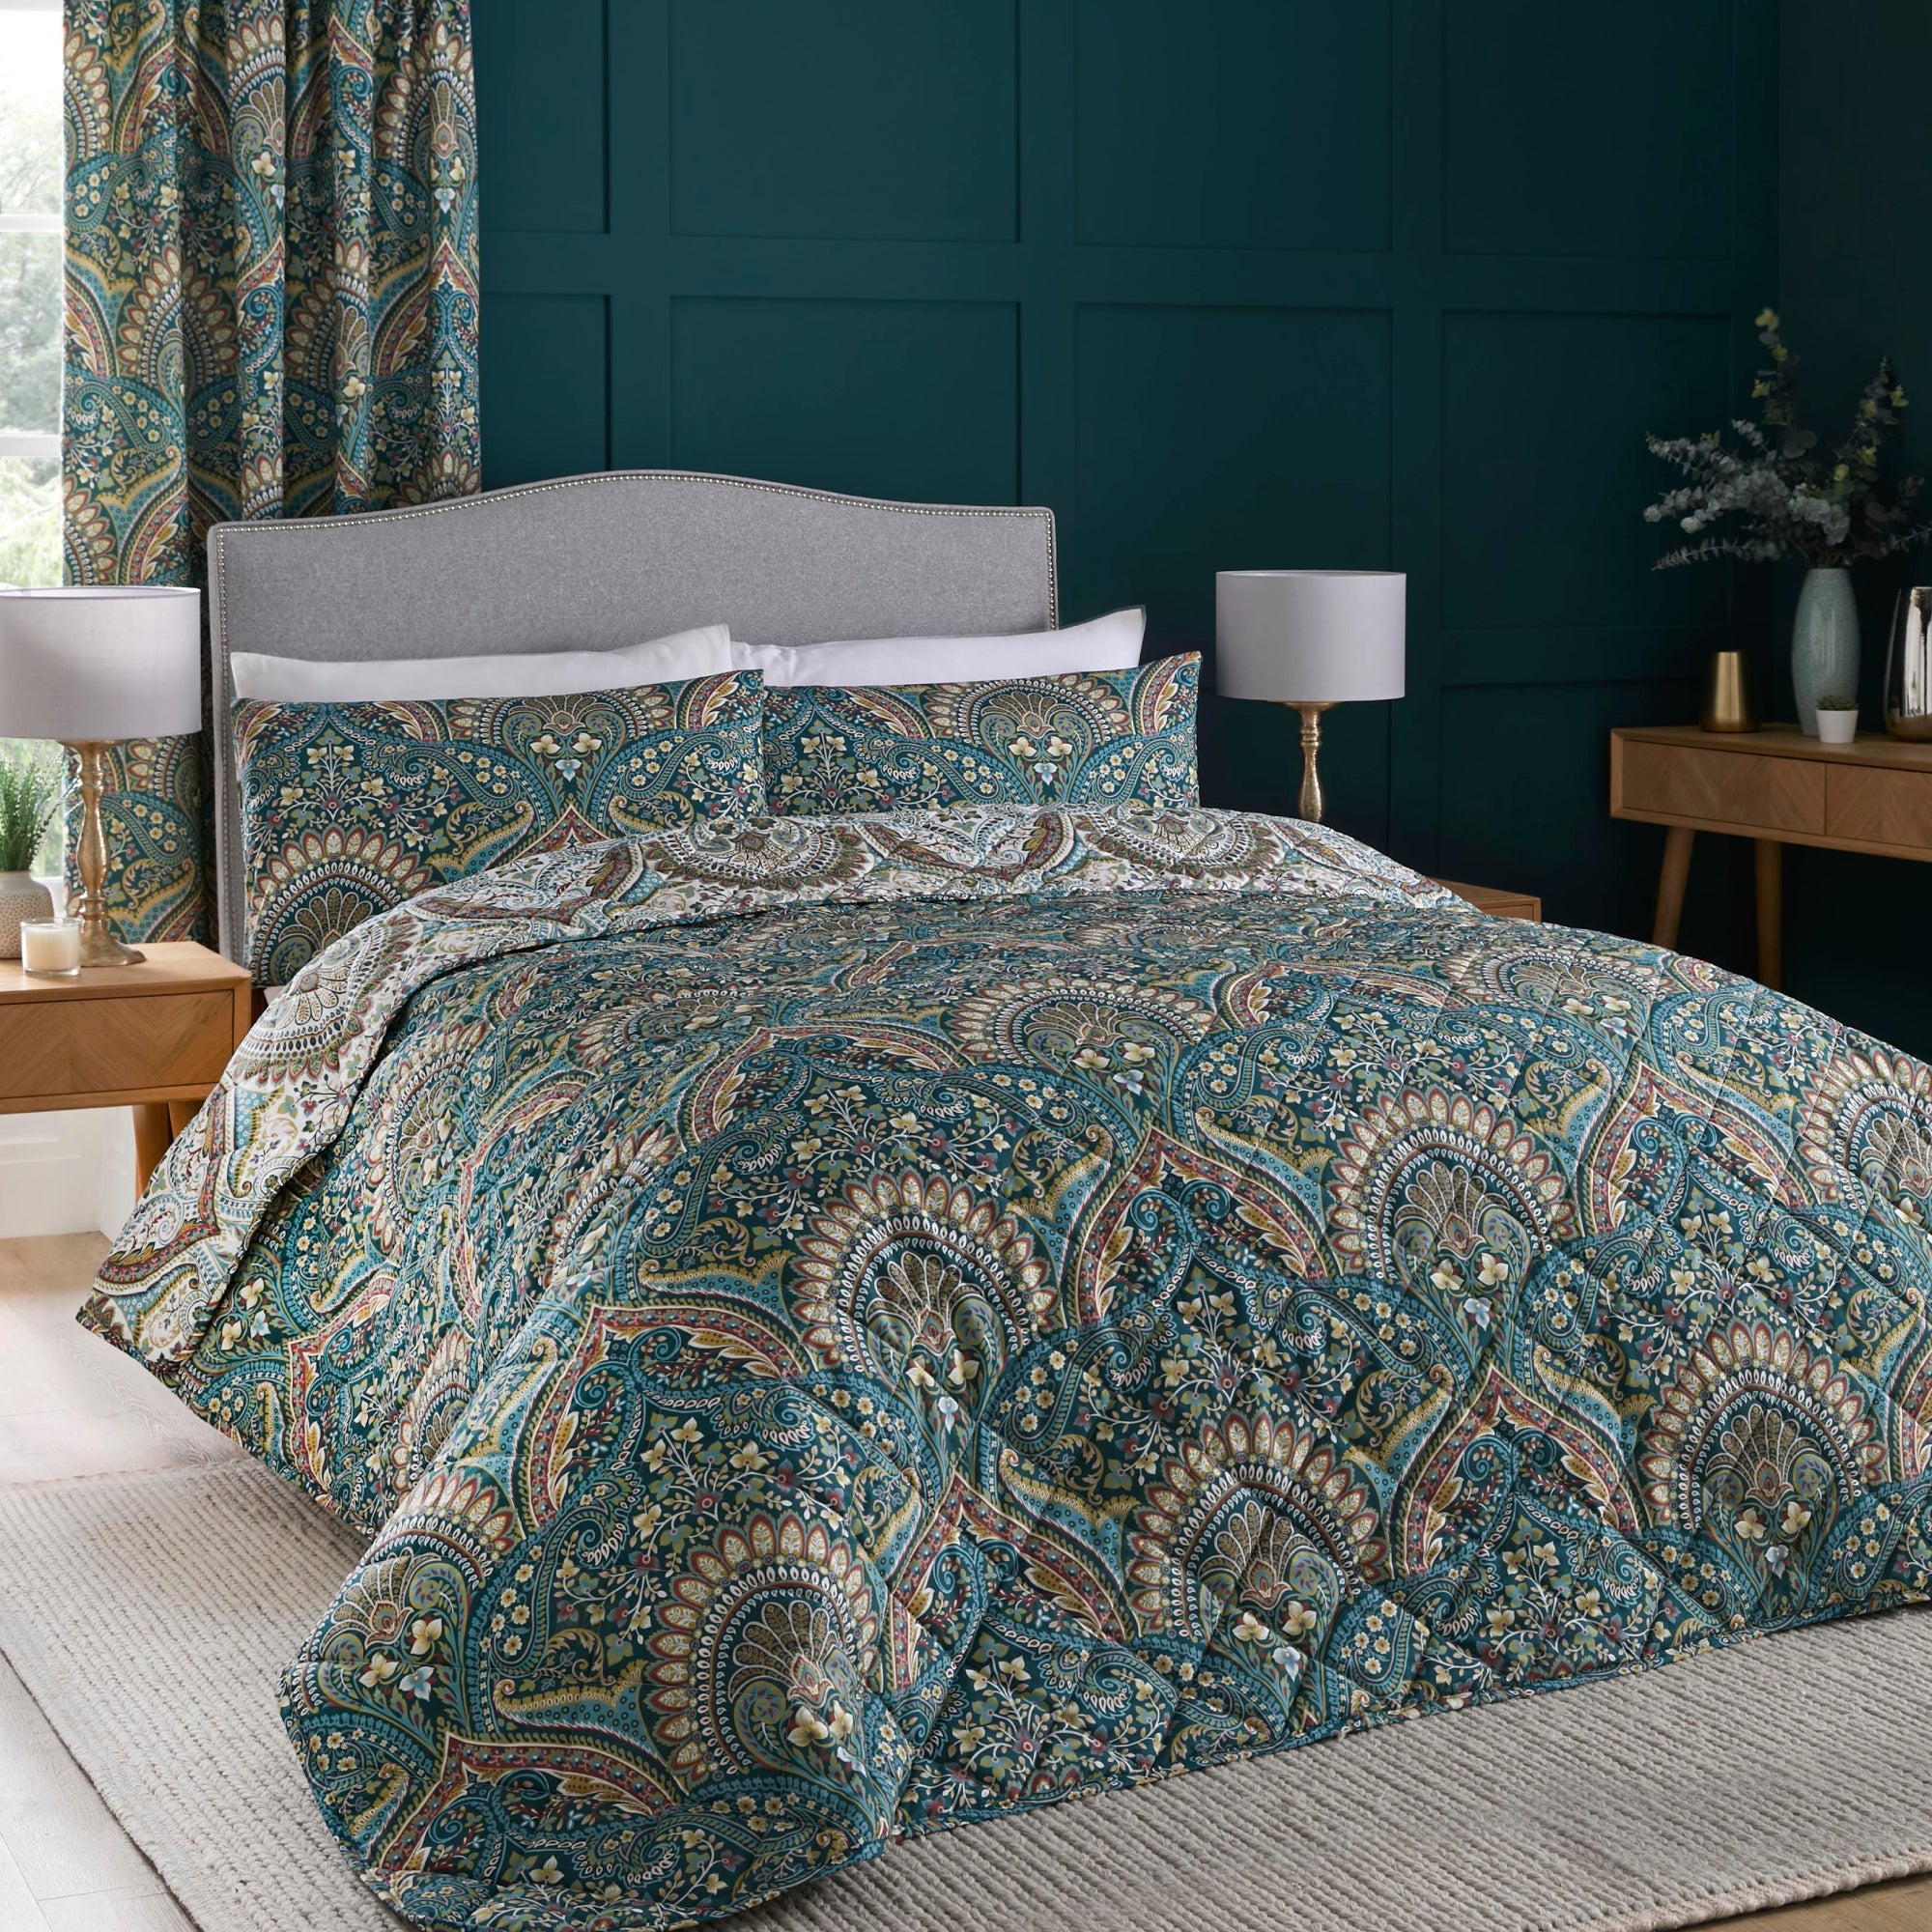 Bedspread Palais by D&D Design in Teal